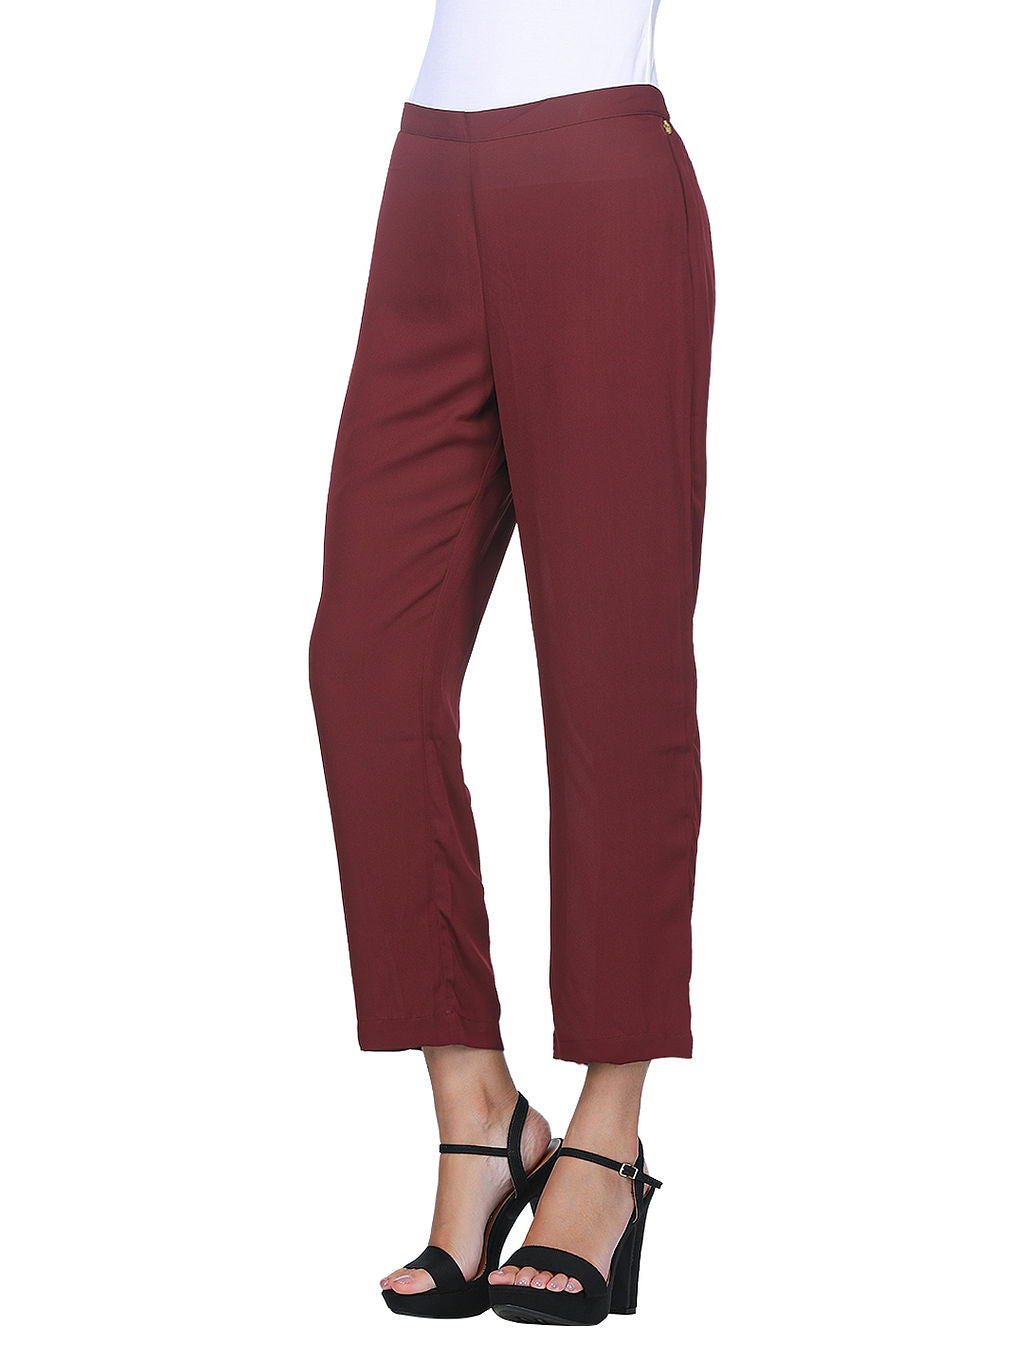 Petite Workwear with LOFT for Late Summer into Fall - Color & Chic | Colored  pants outfits, Classy work outfits, Burgundy pants outfit